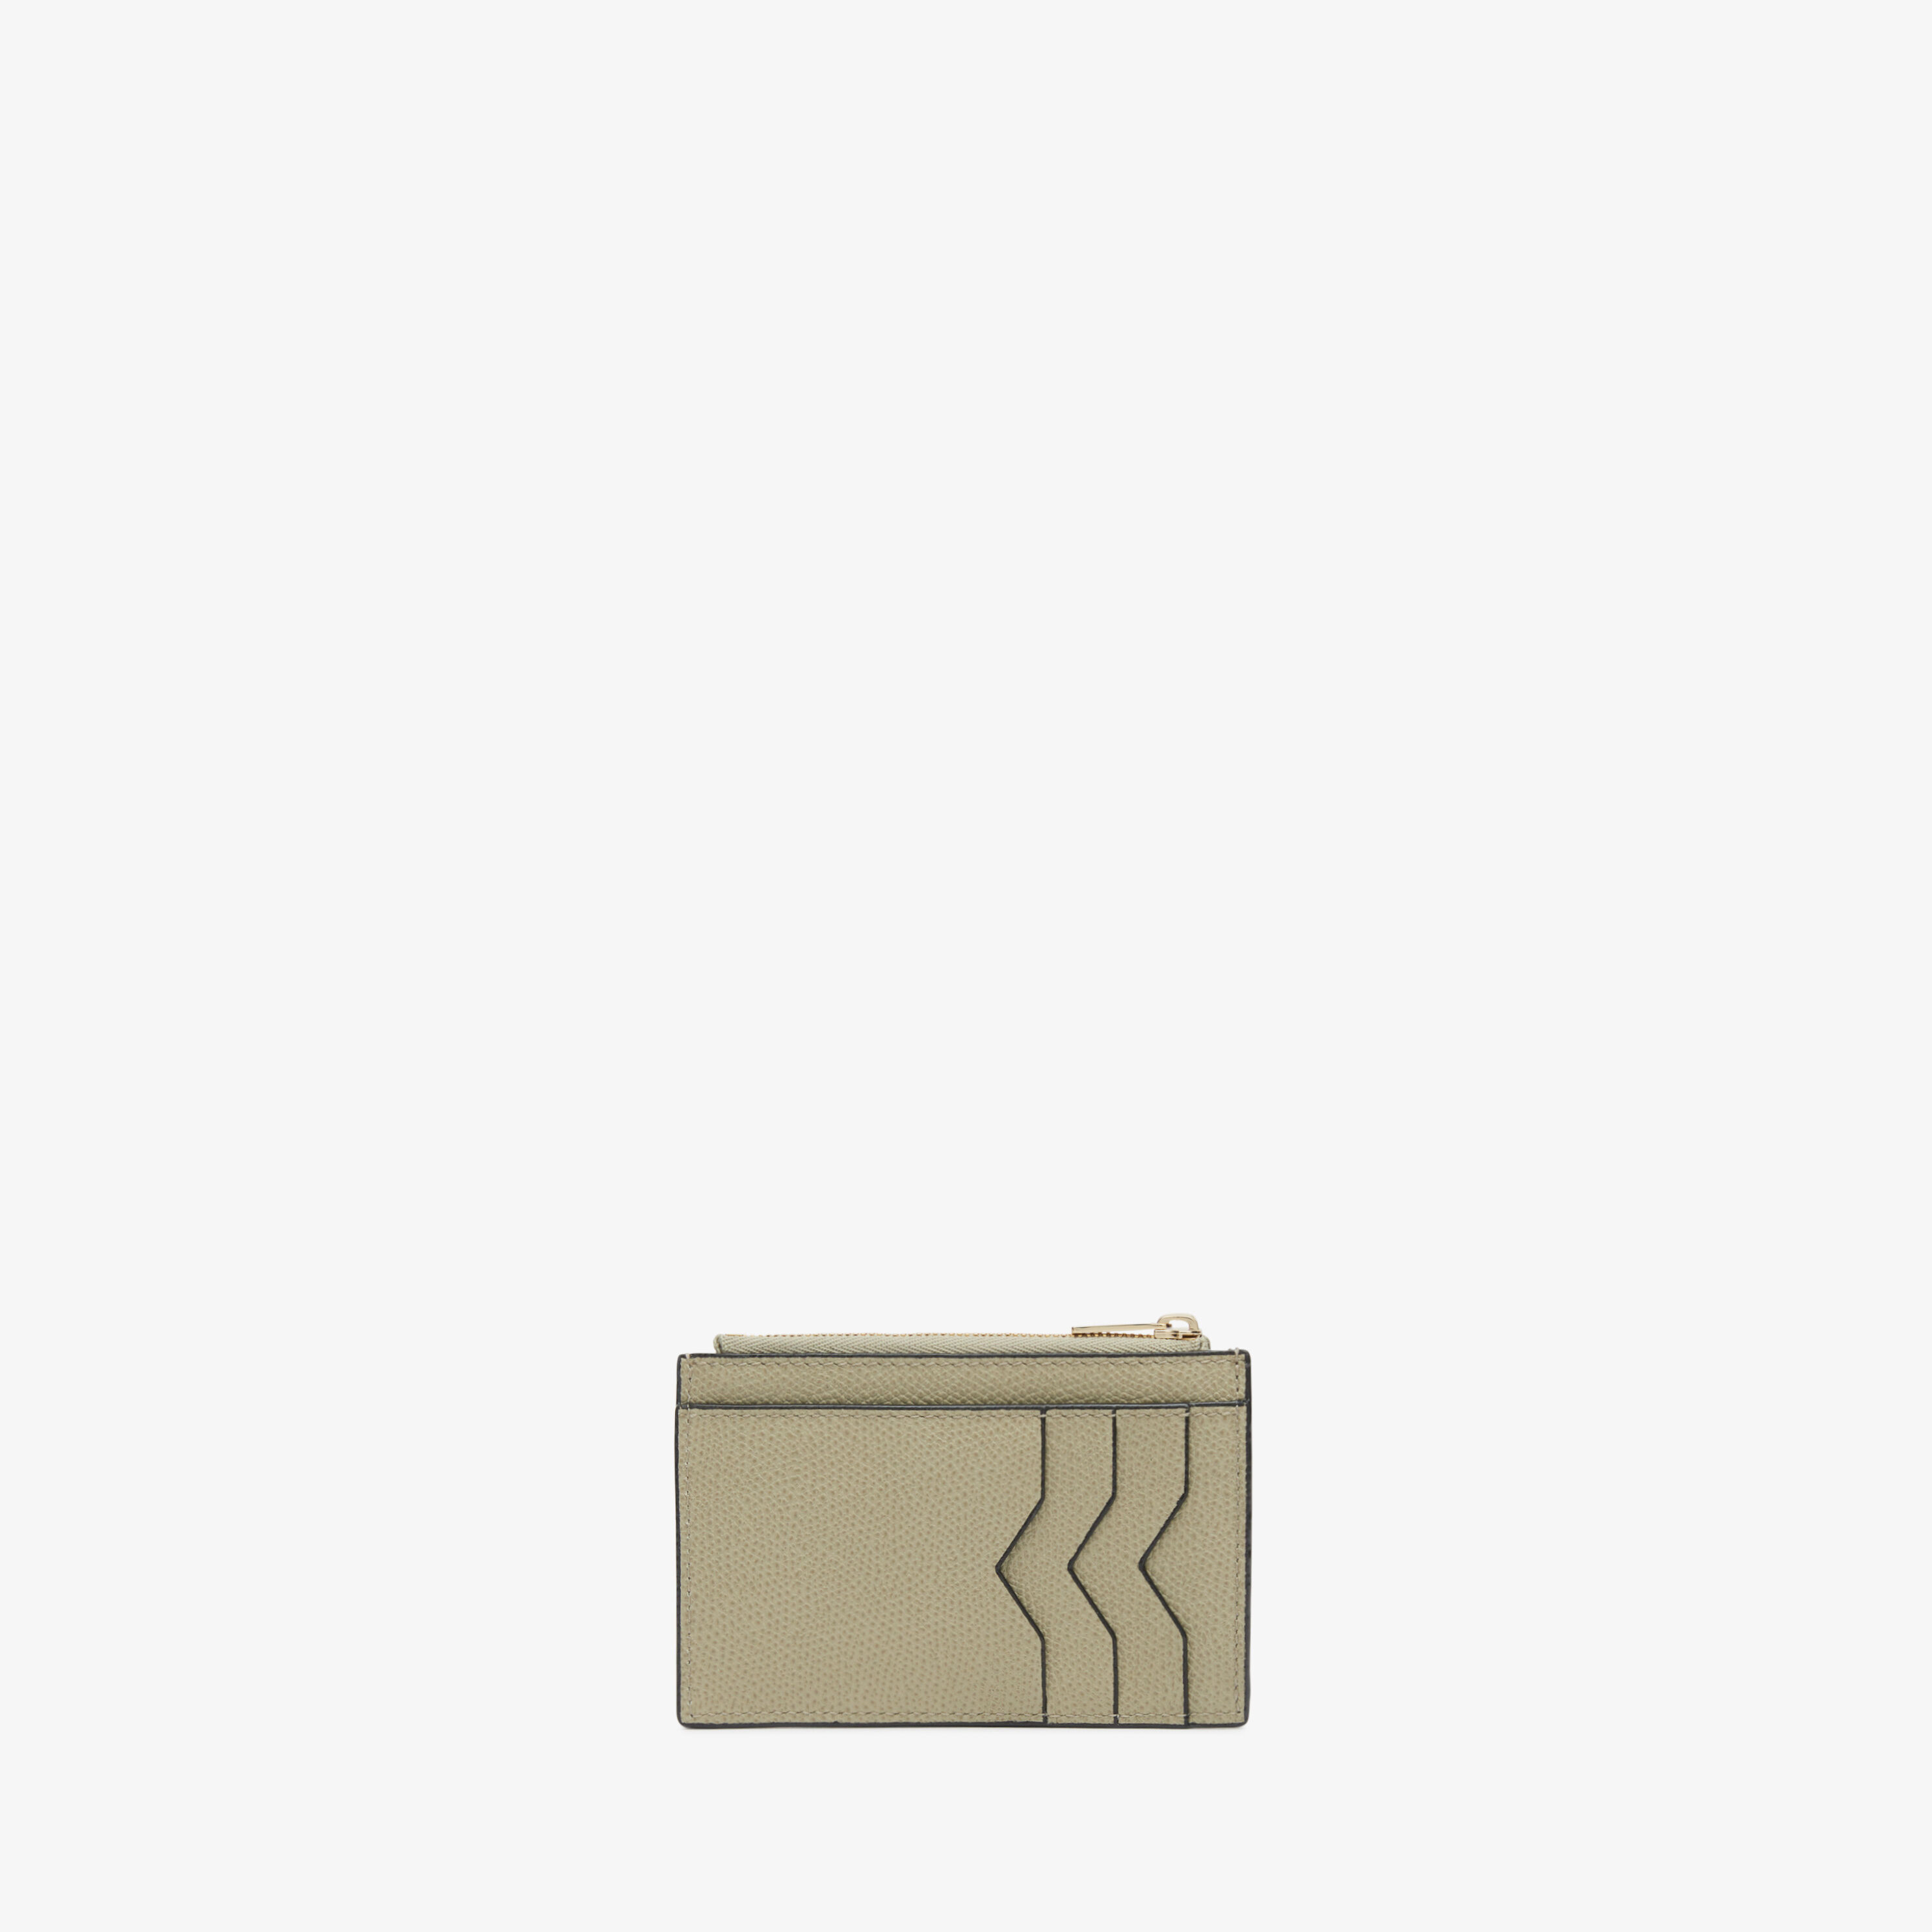 Women & Men's wallets, card cases, small leather goods | Valextra